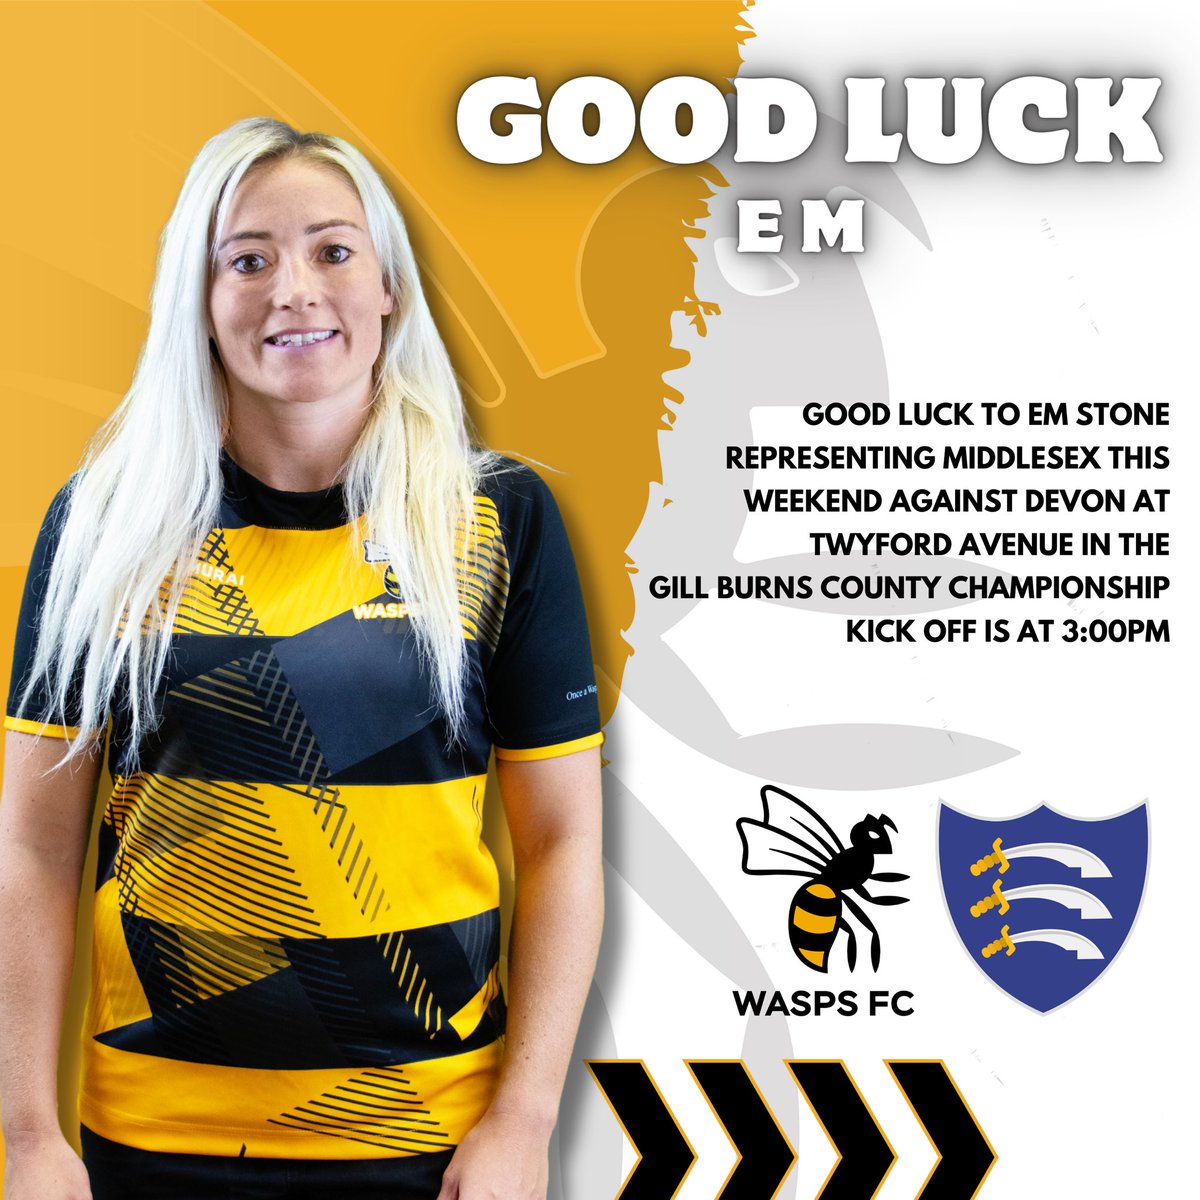 𝗚𝗢𝗢𝗗 𝗟𝗨𝗖𝗞 𝗘𝗠 Good Luck to Em Stone who is representing Middlesex this weekend against Devon at Twyford Avenue in the Gill Burns County Championship. Middlesex RFU vs Devon RFU Sunday 19th May Kick Off - 3:00pm waspsfc.co.uk/news/good-luck… #Rugby #London #OnceAWasp 🐝